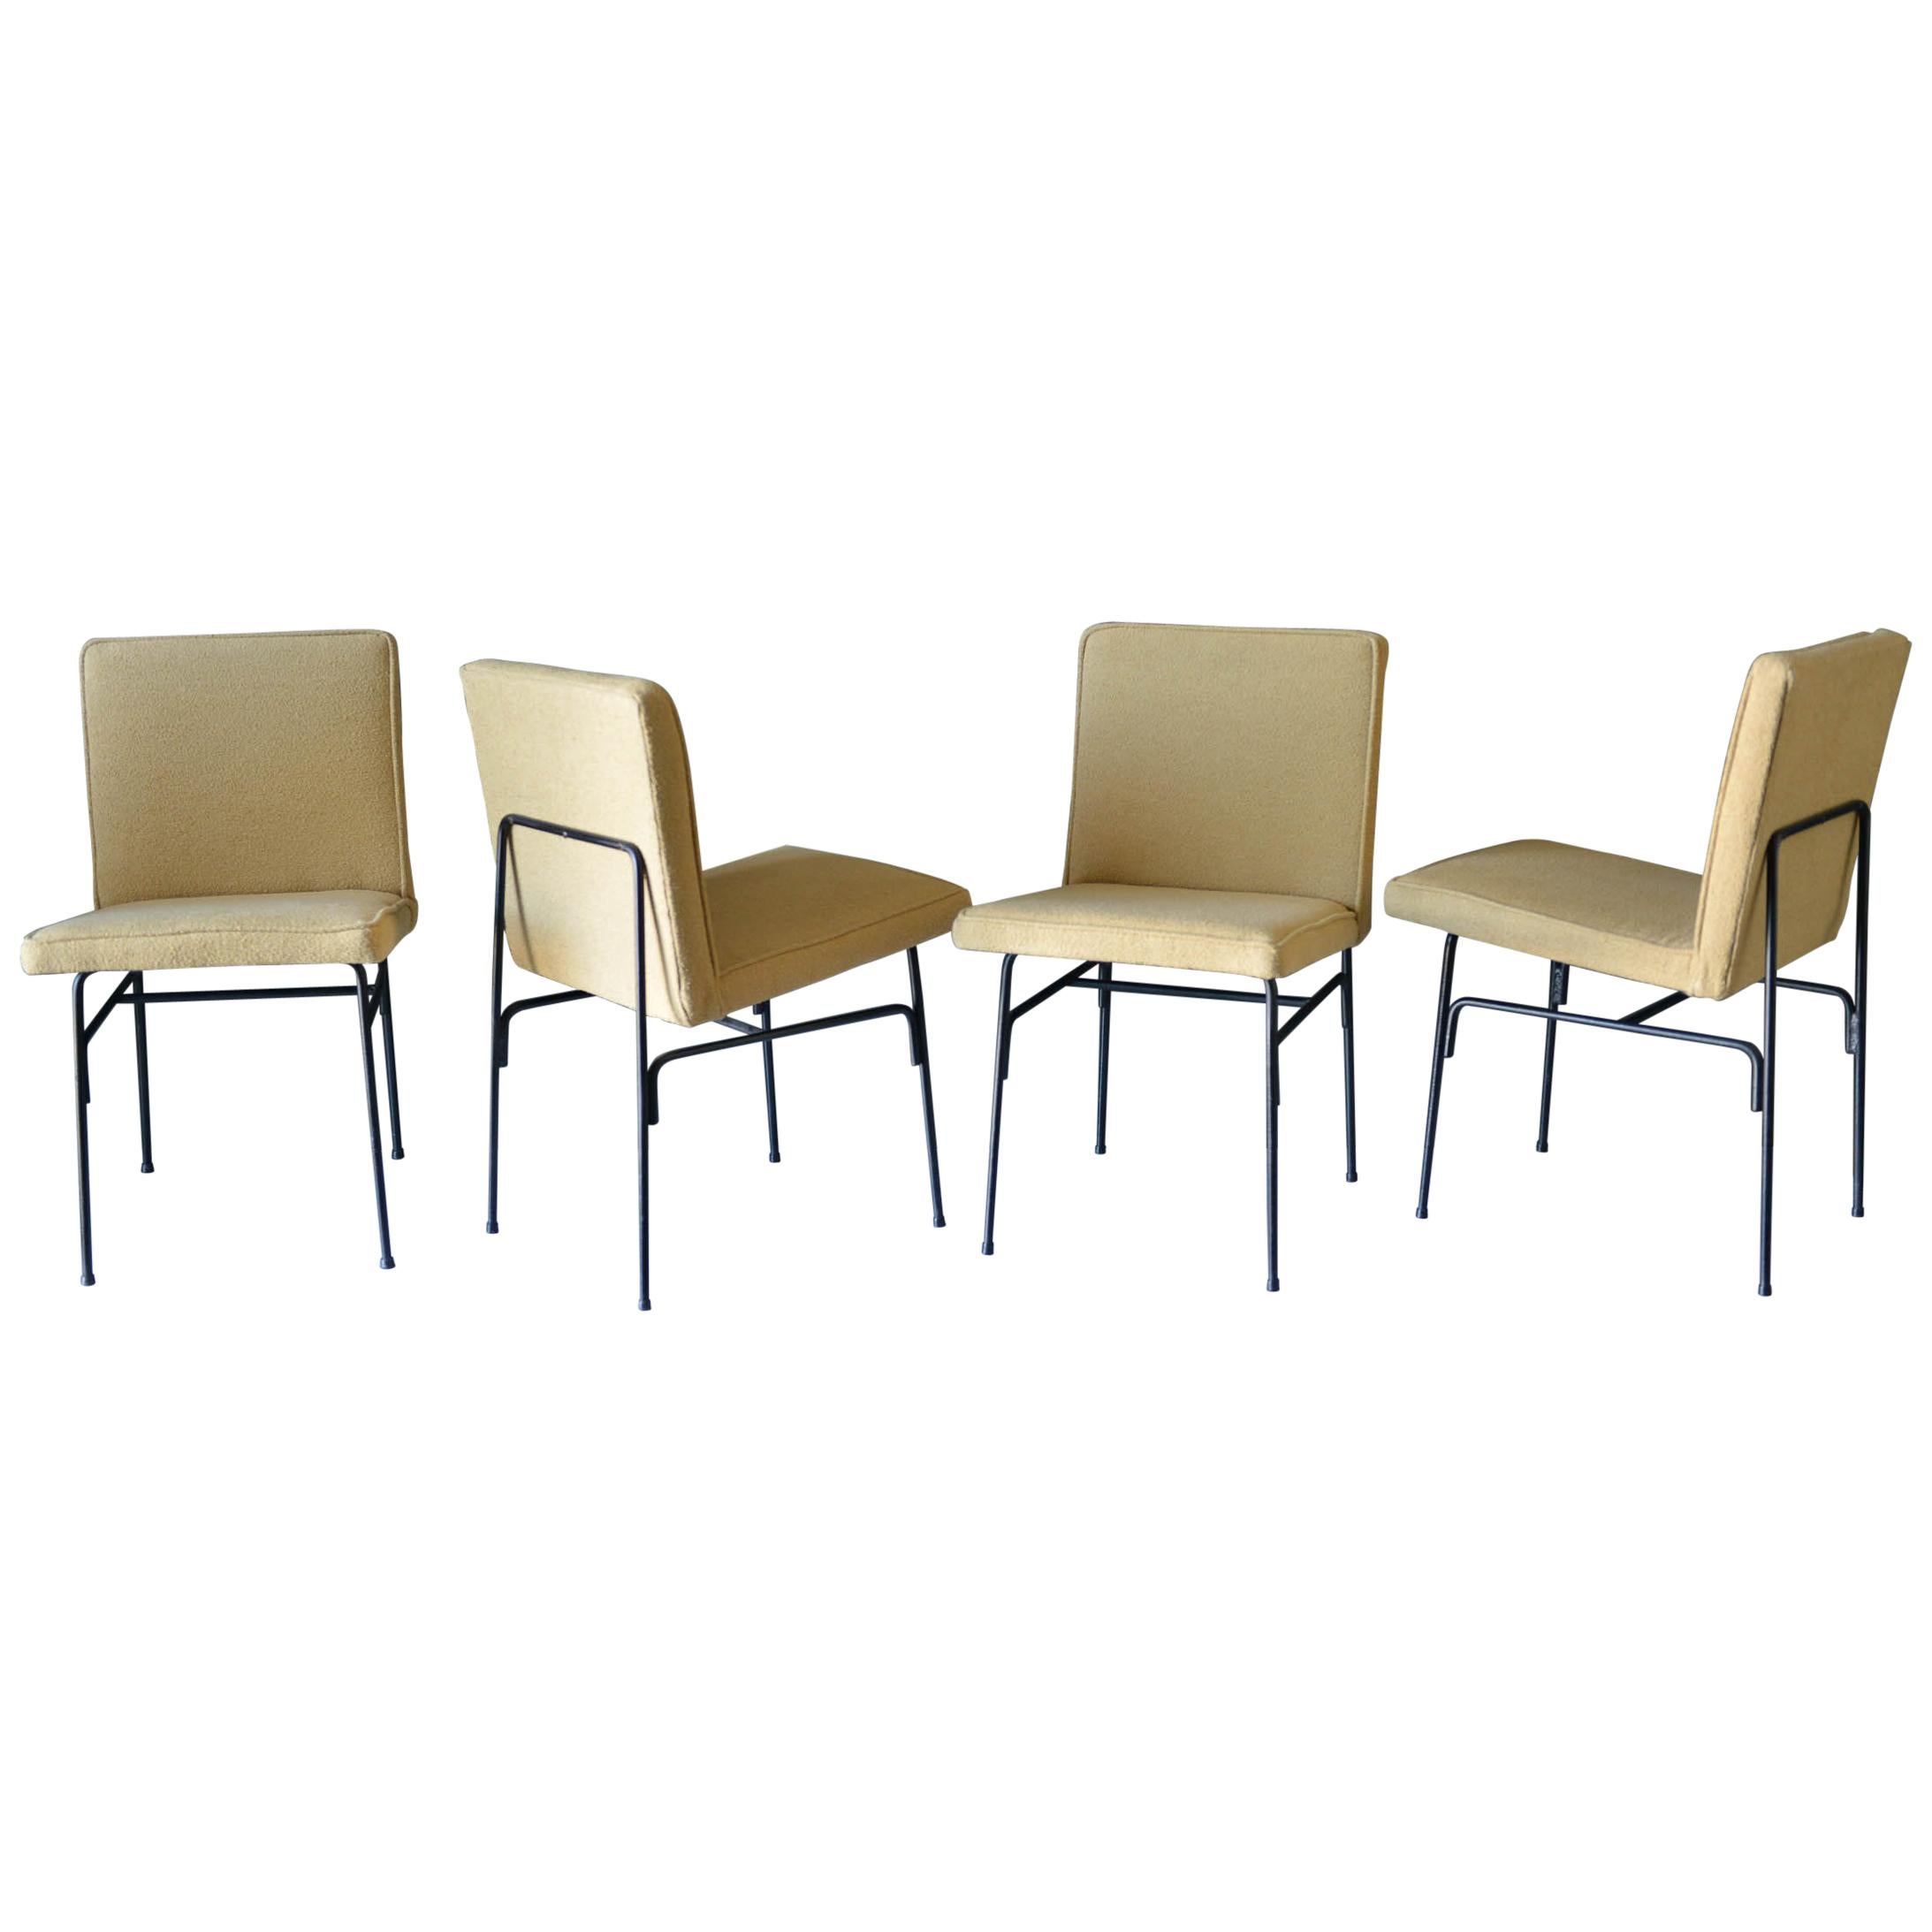 Set of Four Iron Dining Chairs by Allan Gould, circa 1955